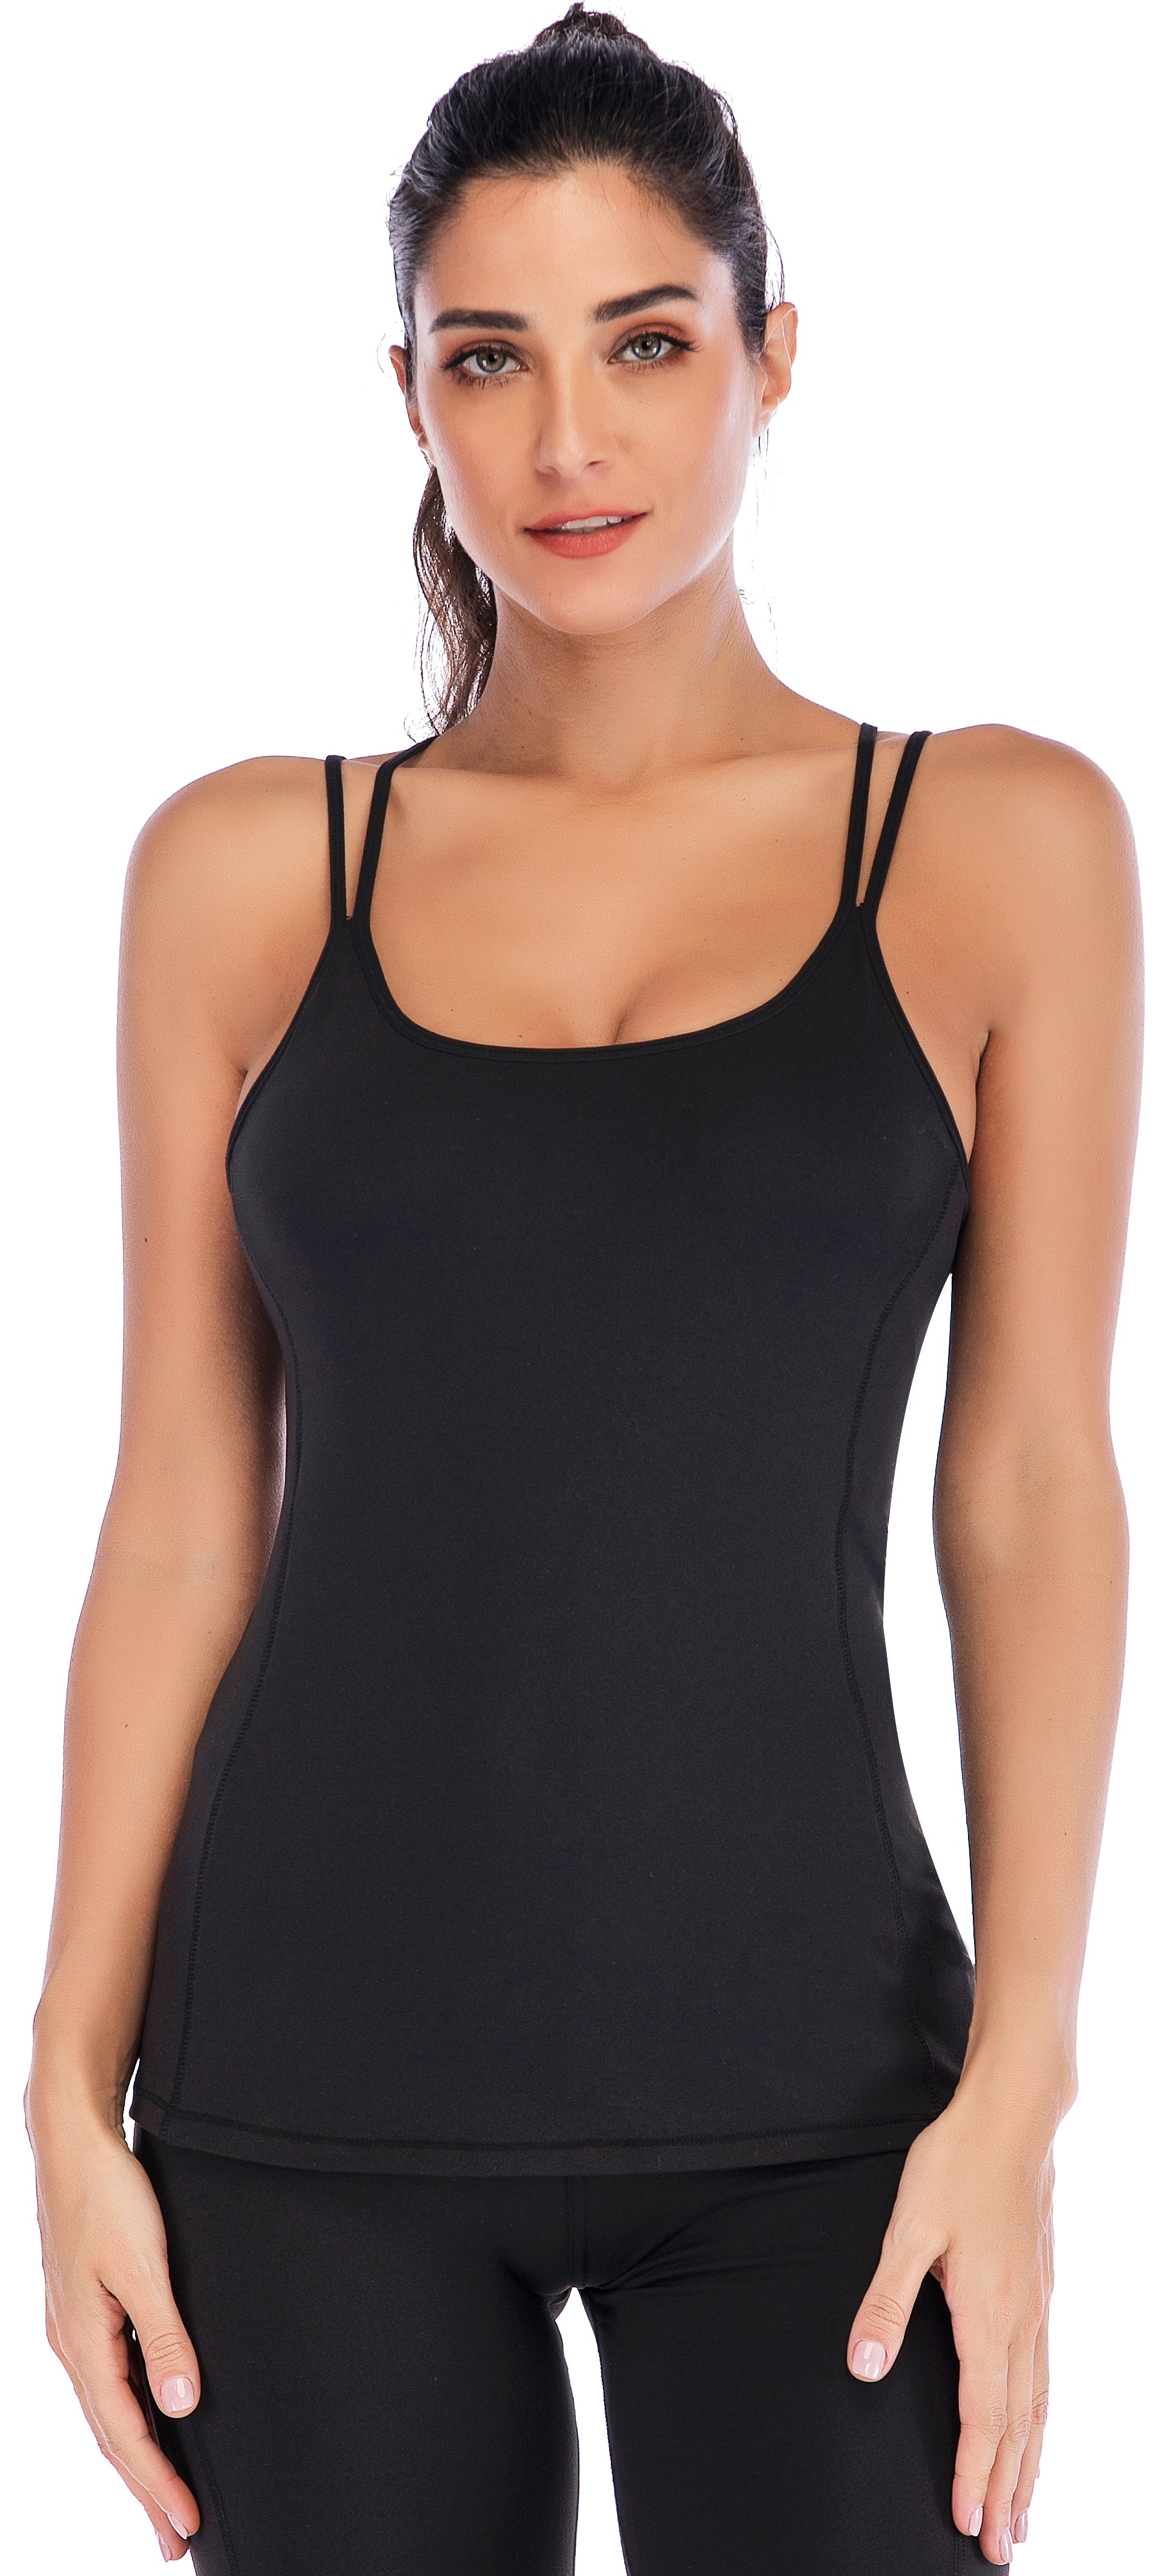  RUNNING GIRL Strappy Yoga Tank Tops For Women Built In Bra  Workout Crop Top Black Athletic Shirts